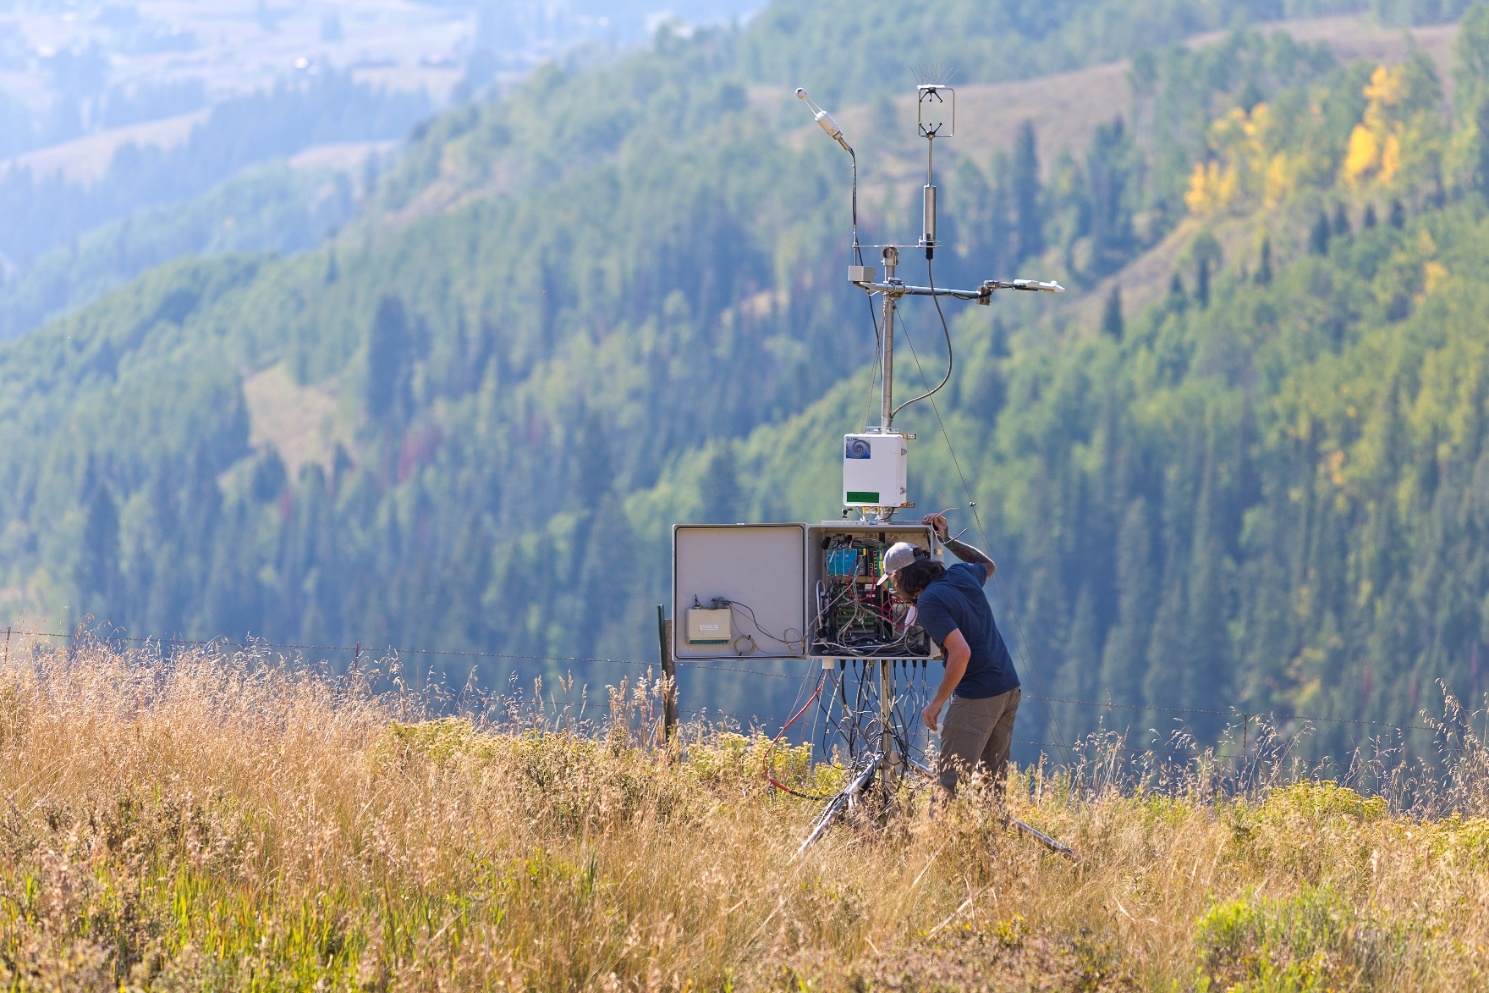 In September 2022, during the Surface Atmosphere Integrated Field Laboratory (SAIL) campaign near Crested Butte, Colorado, technician Wessley King checks a combined instrument setup. An eddy correlation flux measurement system measures heat fluxes, which are then compared with surface energy measures from a surface energy balance system.